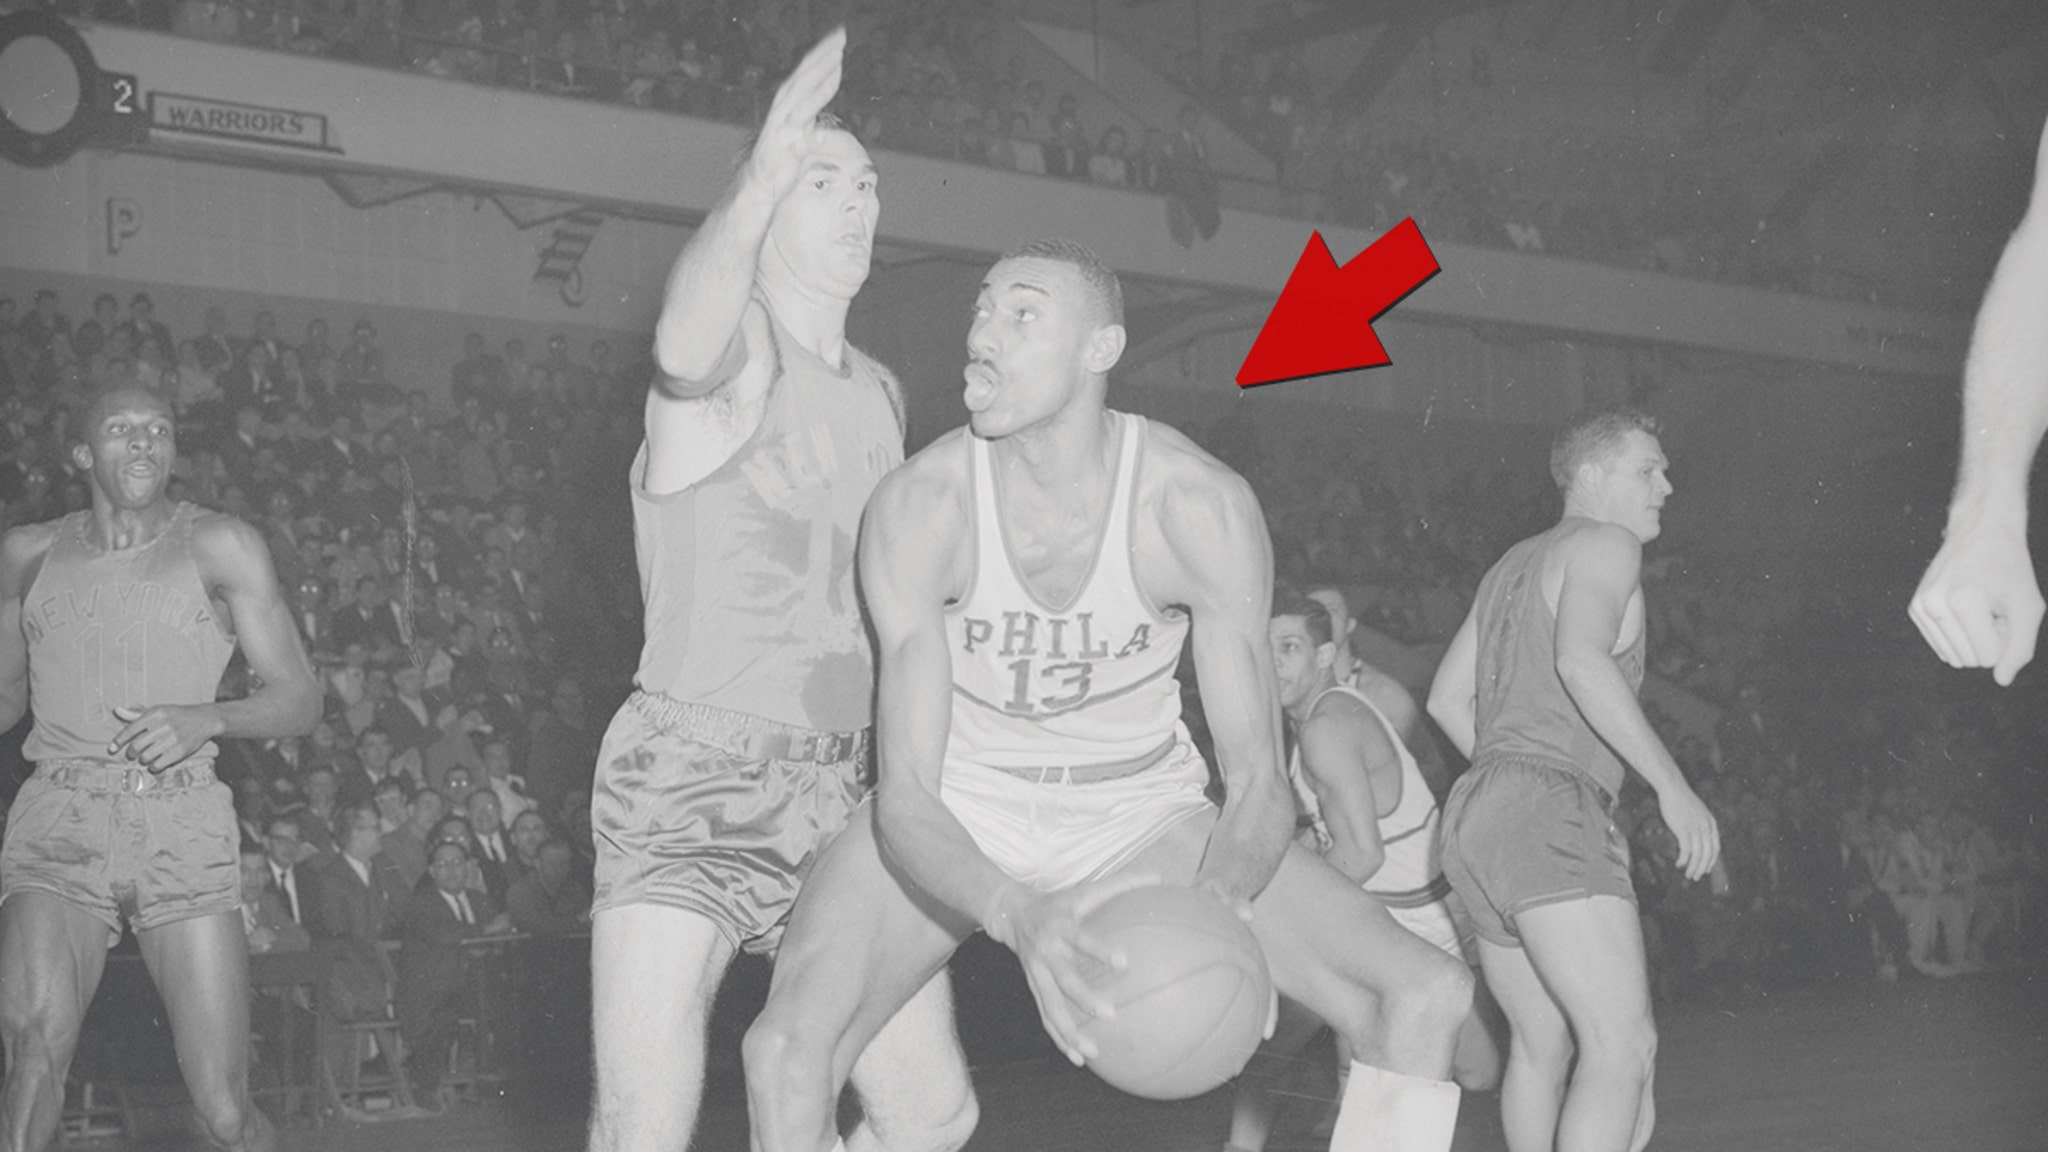 Wilt Chamberlain Rookie Uniform Hits Auction Block, Could Sell For